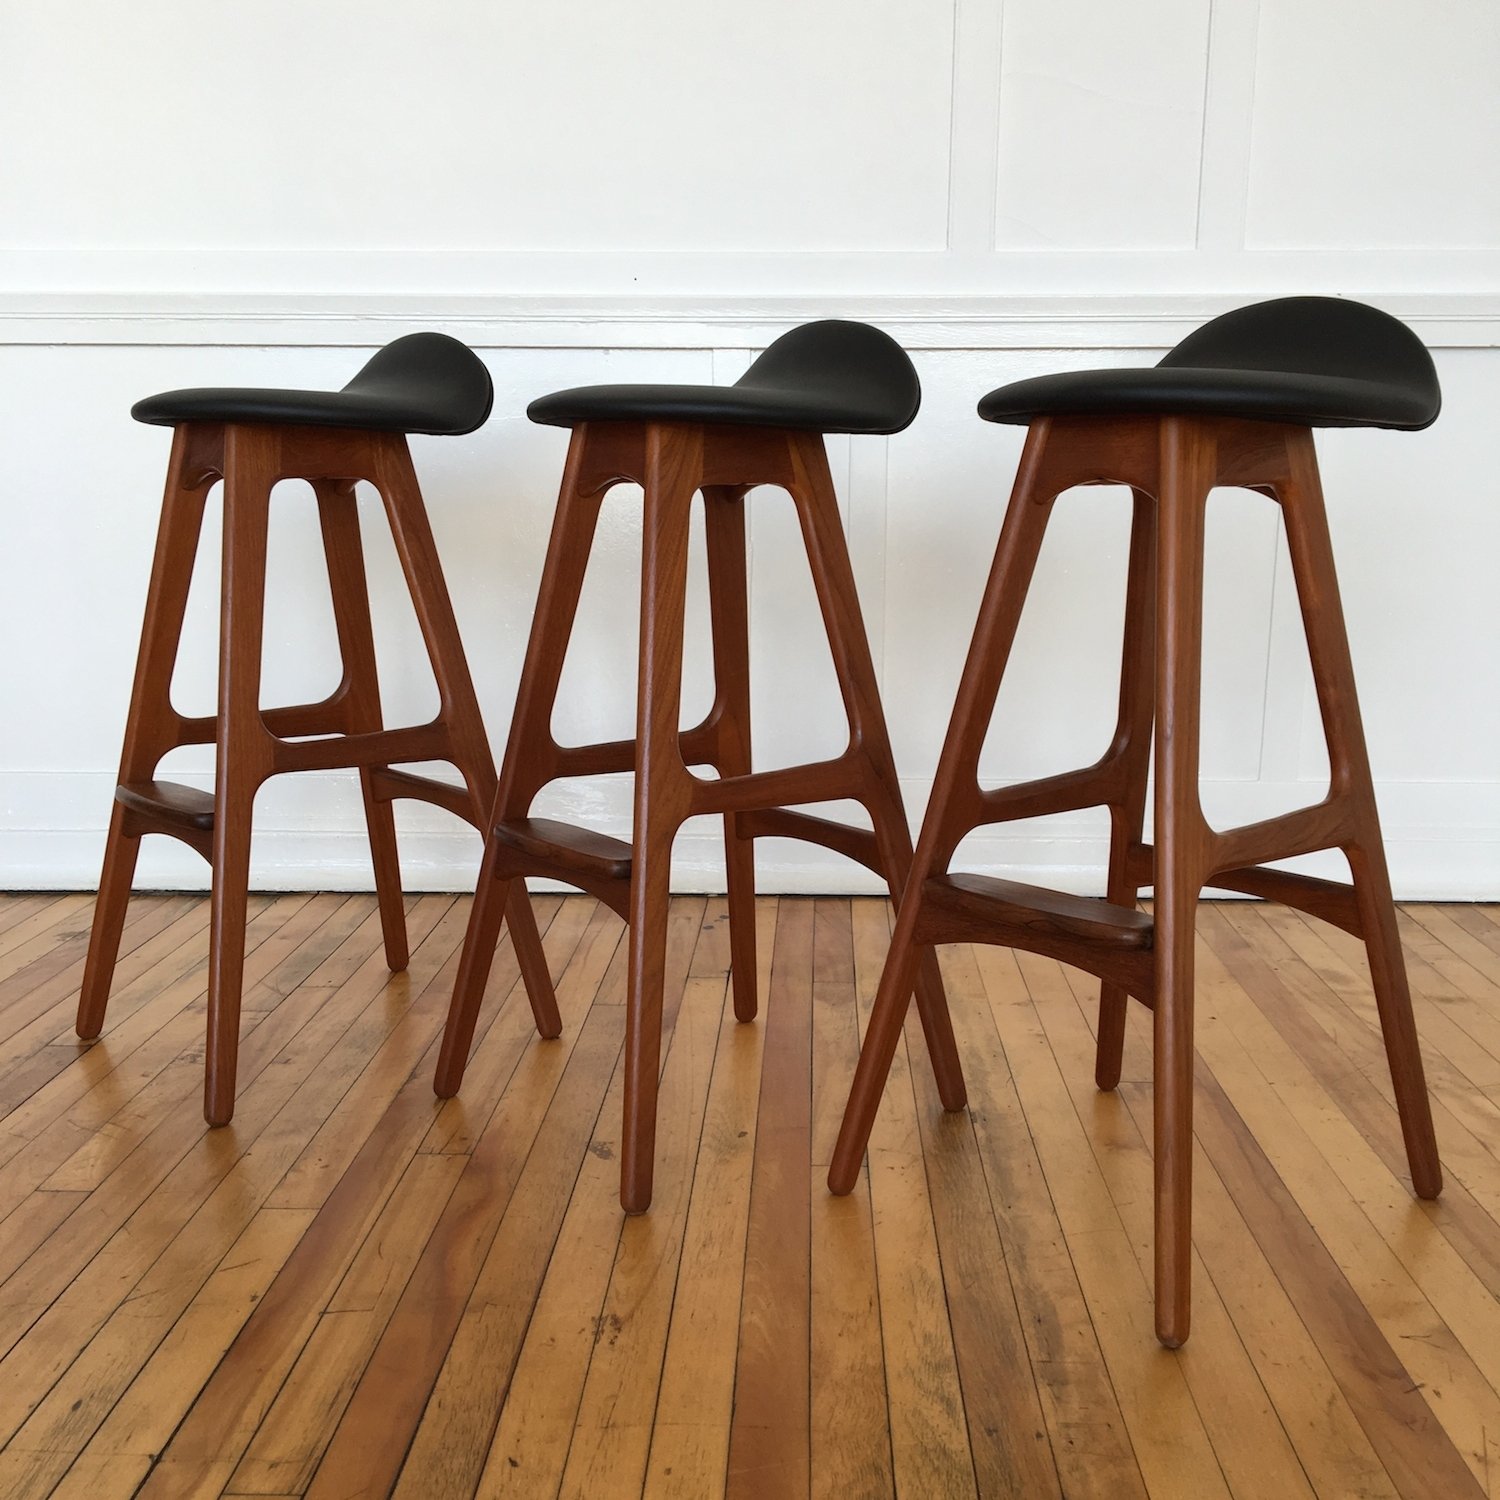 set-of-three-vintage-original-danish-teak-and-rosewood-counter-bar-stools-by-erik-buch-in-new-leather.jpg